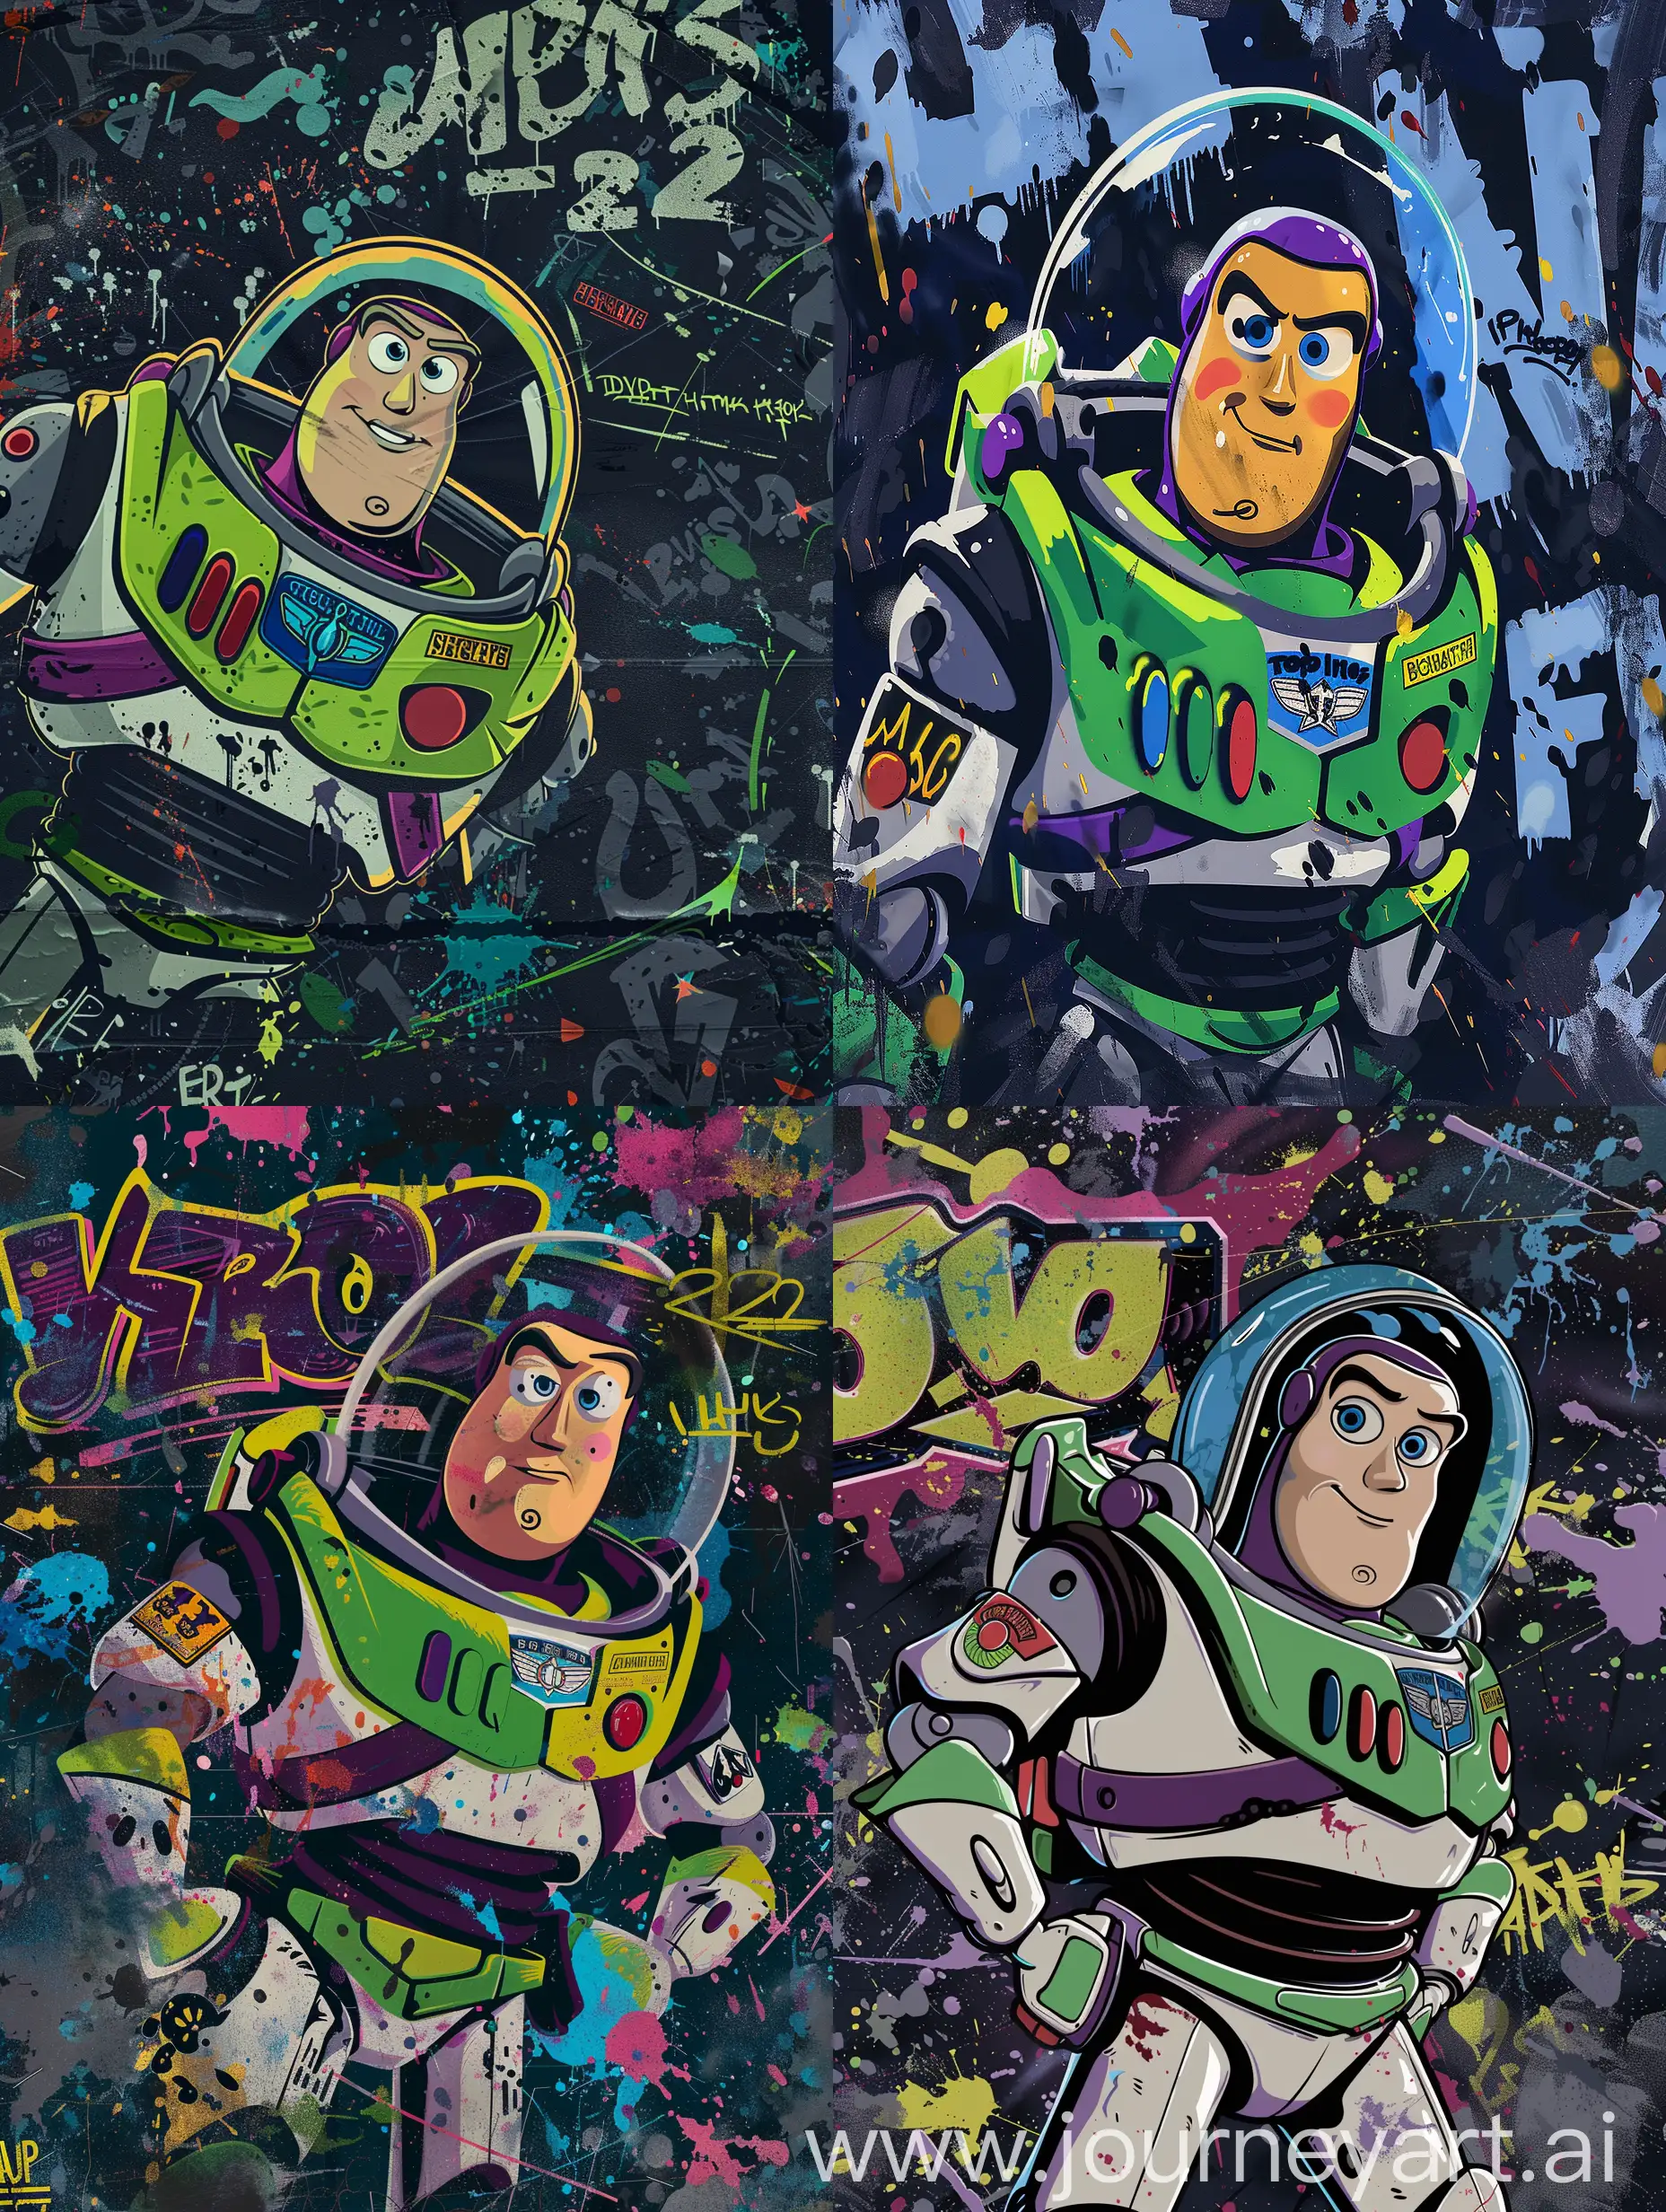 flat illustration graffiti on cava:2, fantasy illustration of the character buzz lightyear, from the movie toy story, buzz lightyear, close up, cosmos, galaxy, detailed, tag, background full of dark paint splash and graffiti text, random sized graffiti text all over typography:2, urban, canva texture, text 